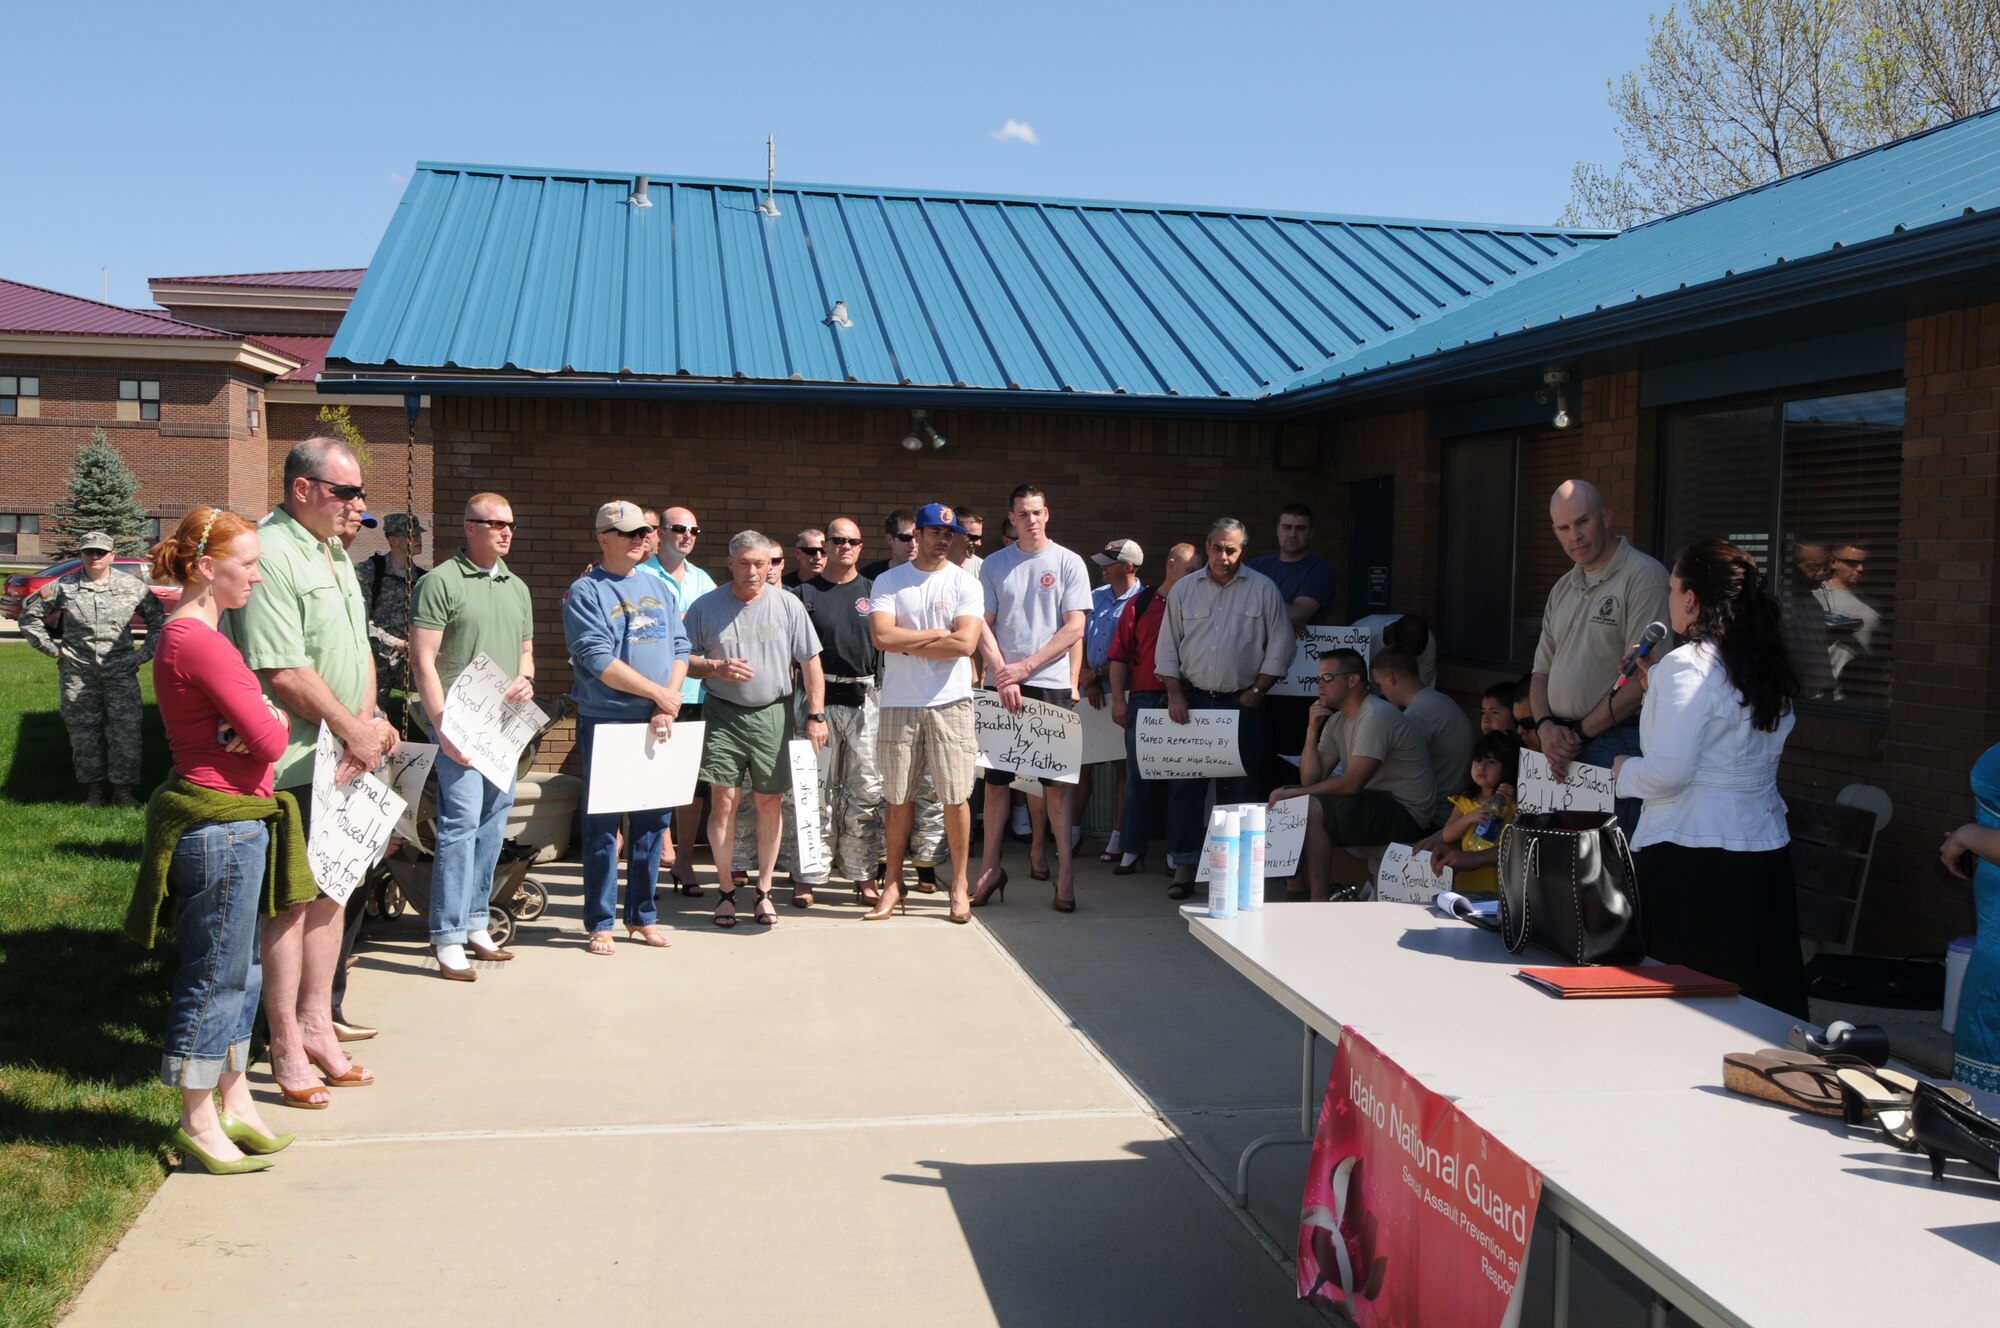 Members of the Idaho Army and Air National Guard gather for the Walk a Mile in Her Shoes event April 20 at Gowen Field, Boise, Idaho. The event was held in recognition of Sexual Assault Awareness month.